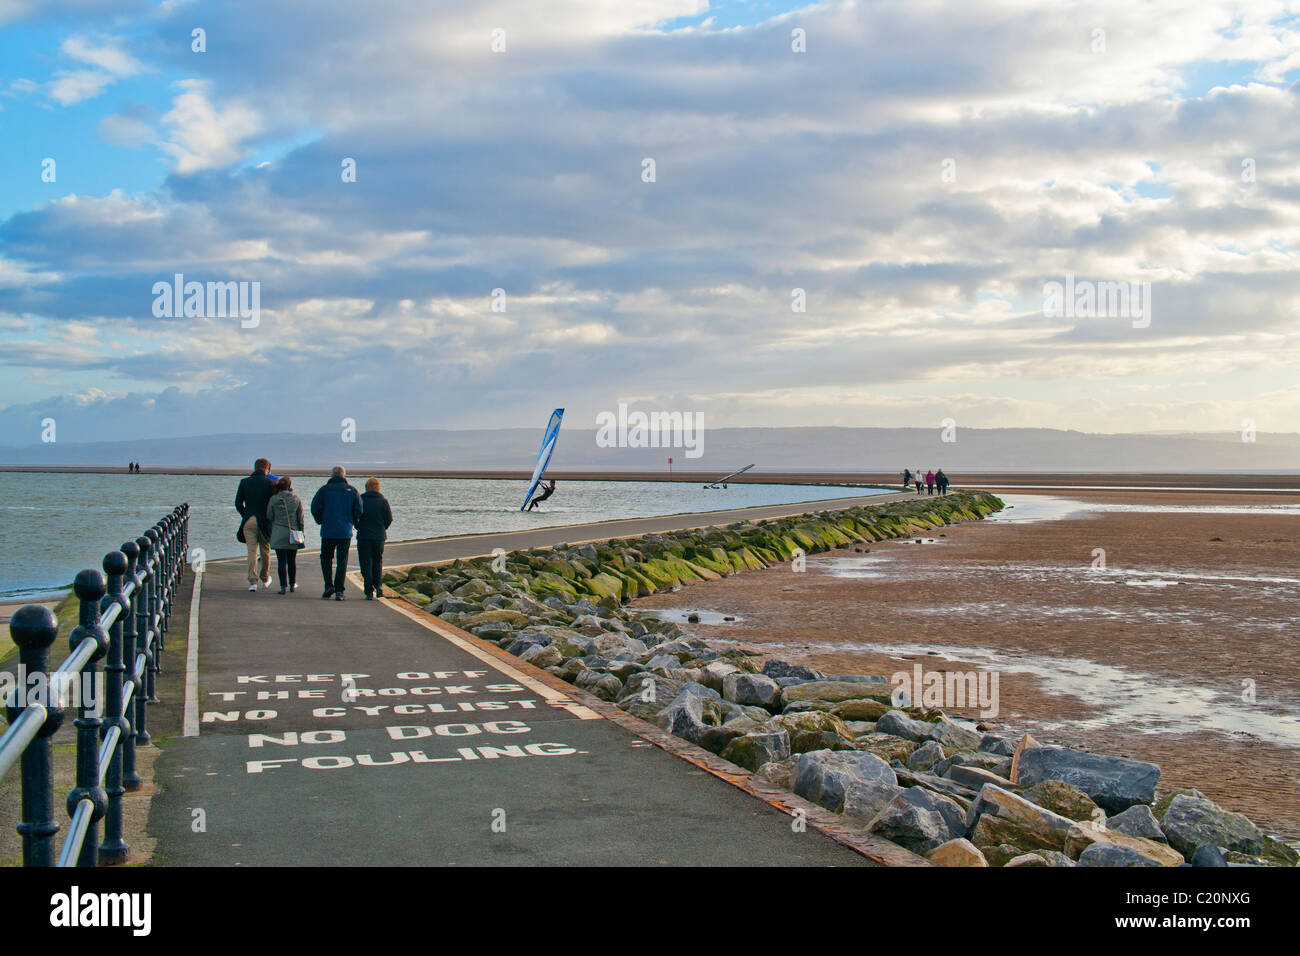 Planche à voile, West Kirby, Wirral, Angleterre, Février, 2011 Banque D'Images